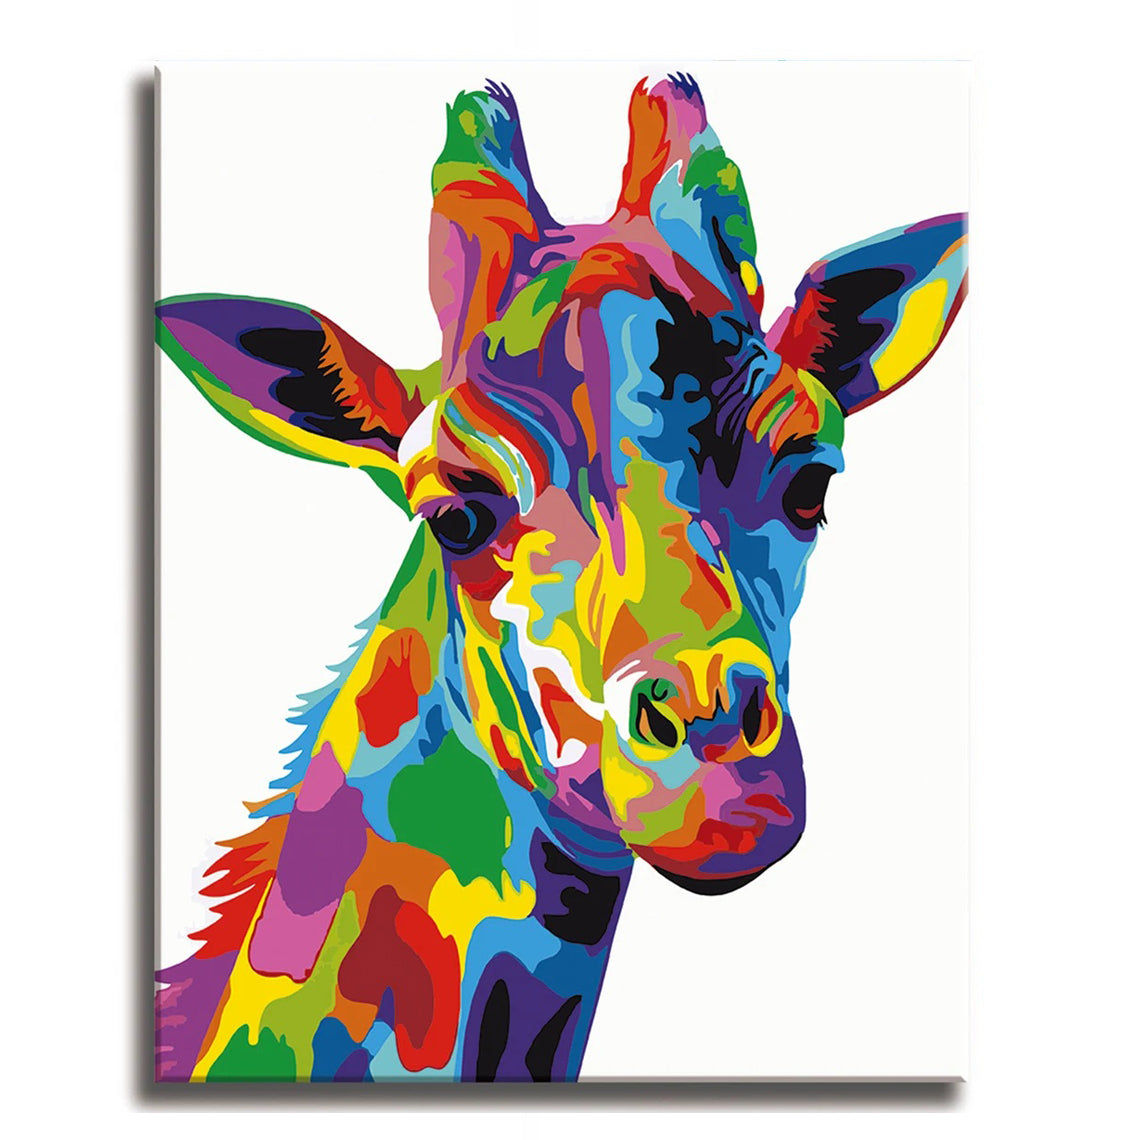 Buy Colorful Giraffe Easy Paint by Numbers Kit for Adults Free Shipping  From California, USA Online in India 